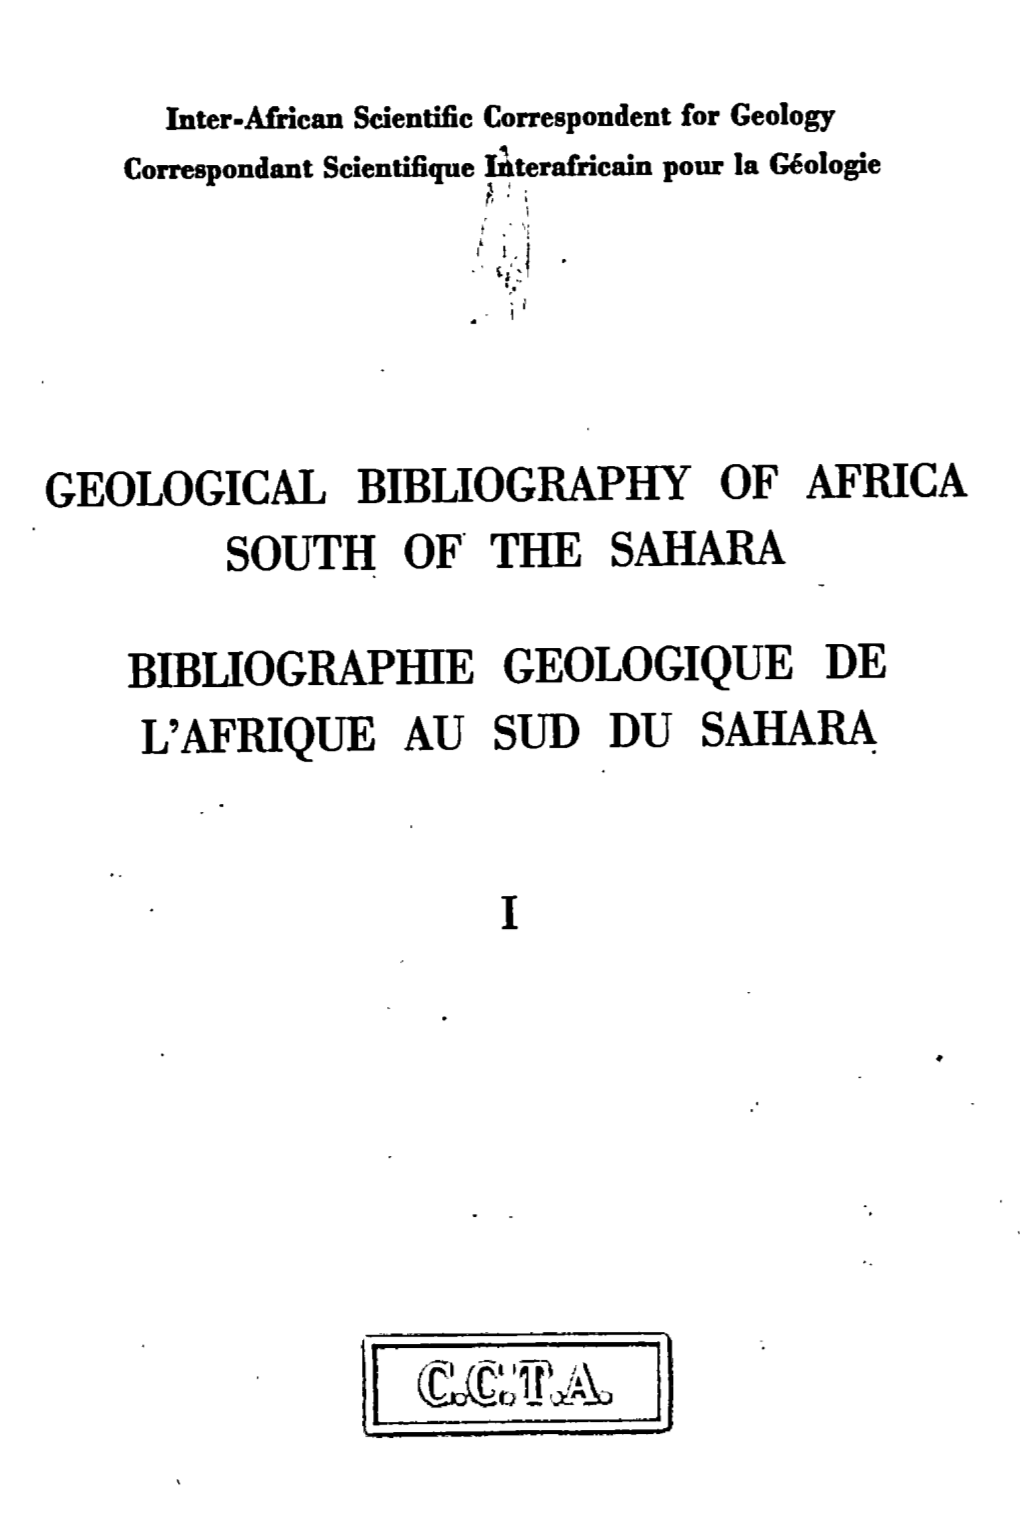 Geological Bibliography Os Africa South of the Sahara E.Pdf (1.927Mb)